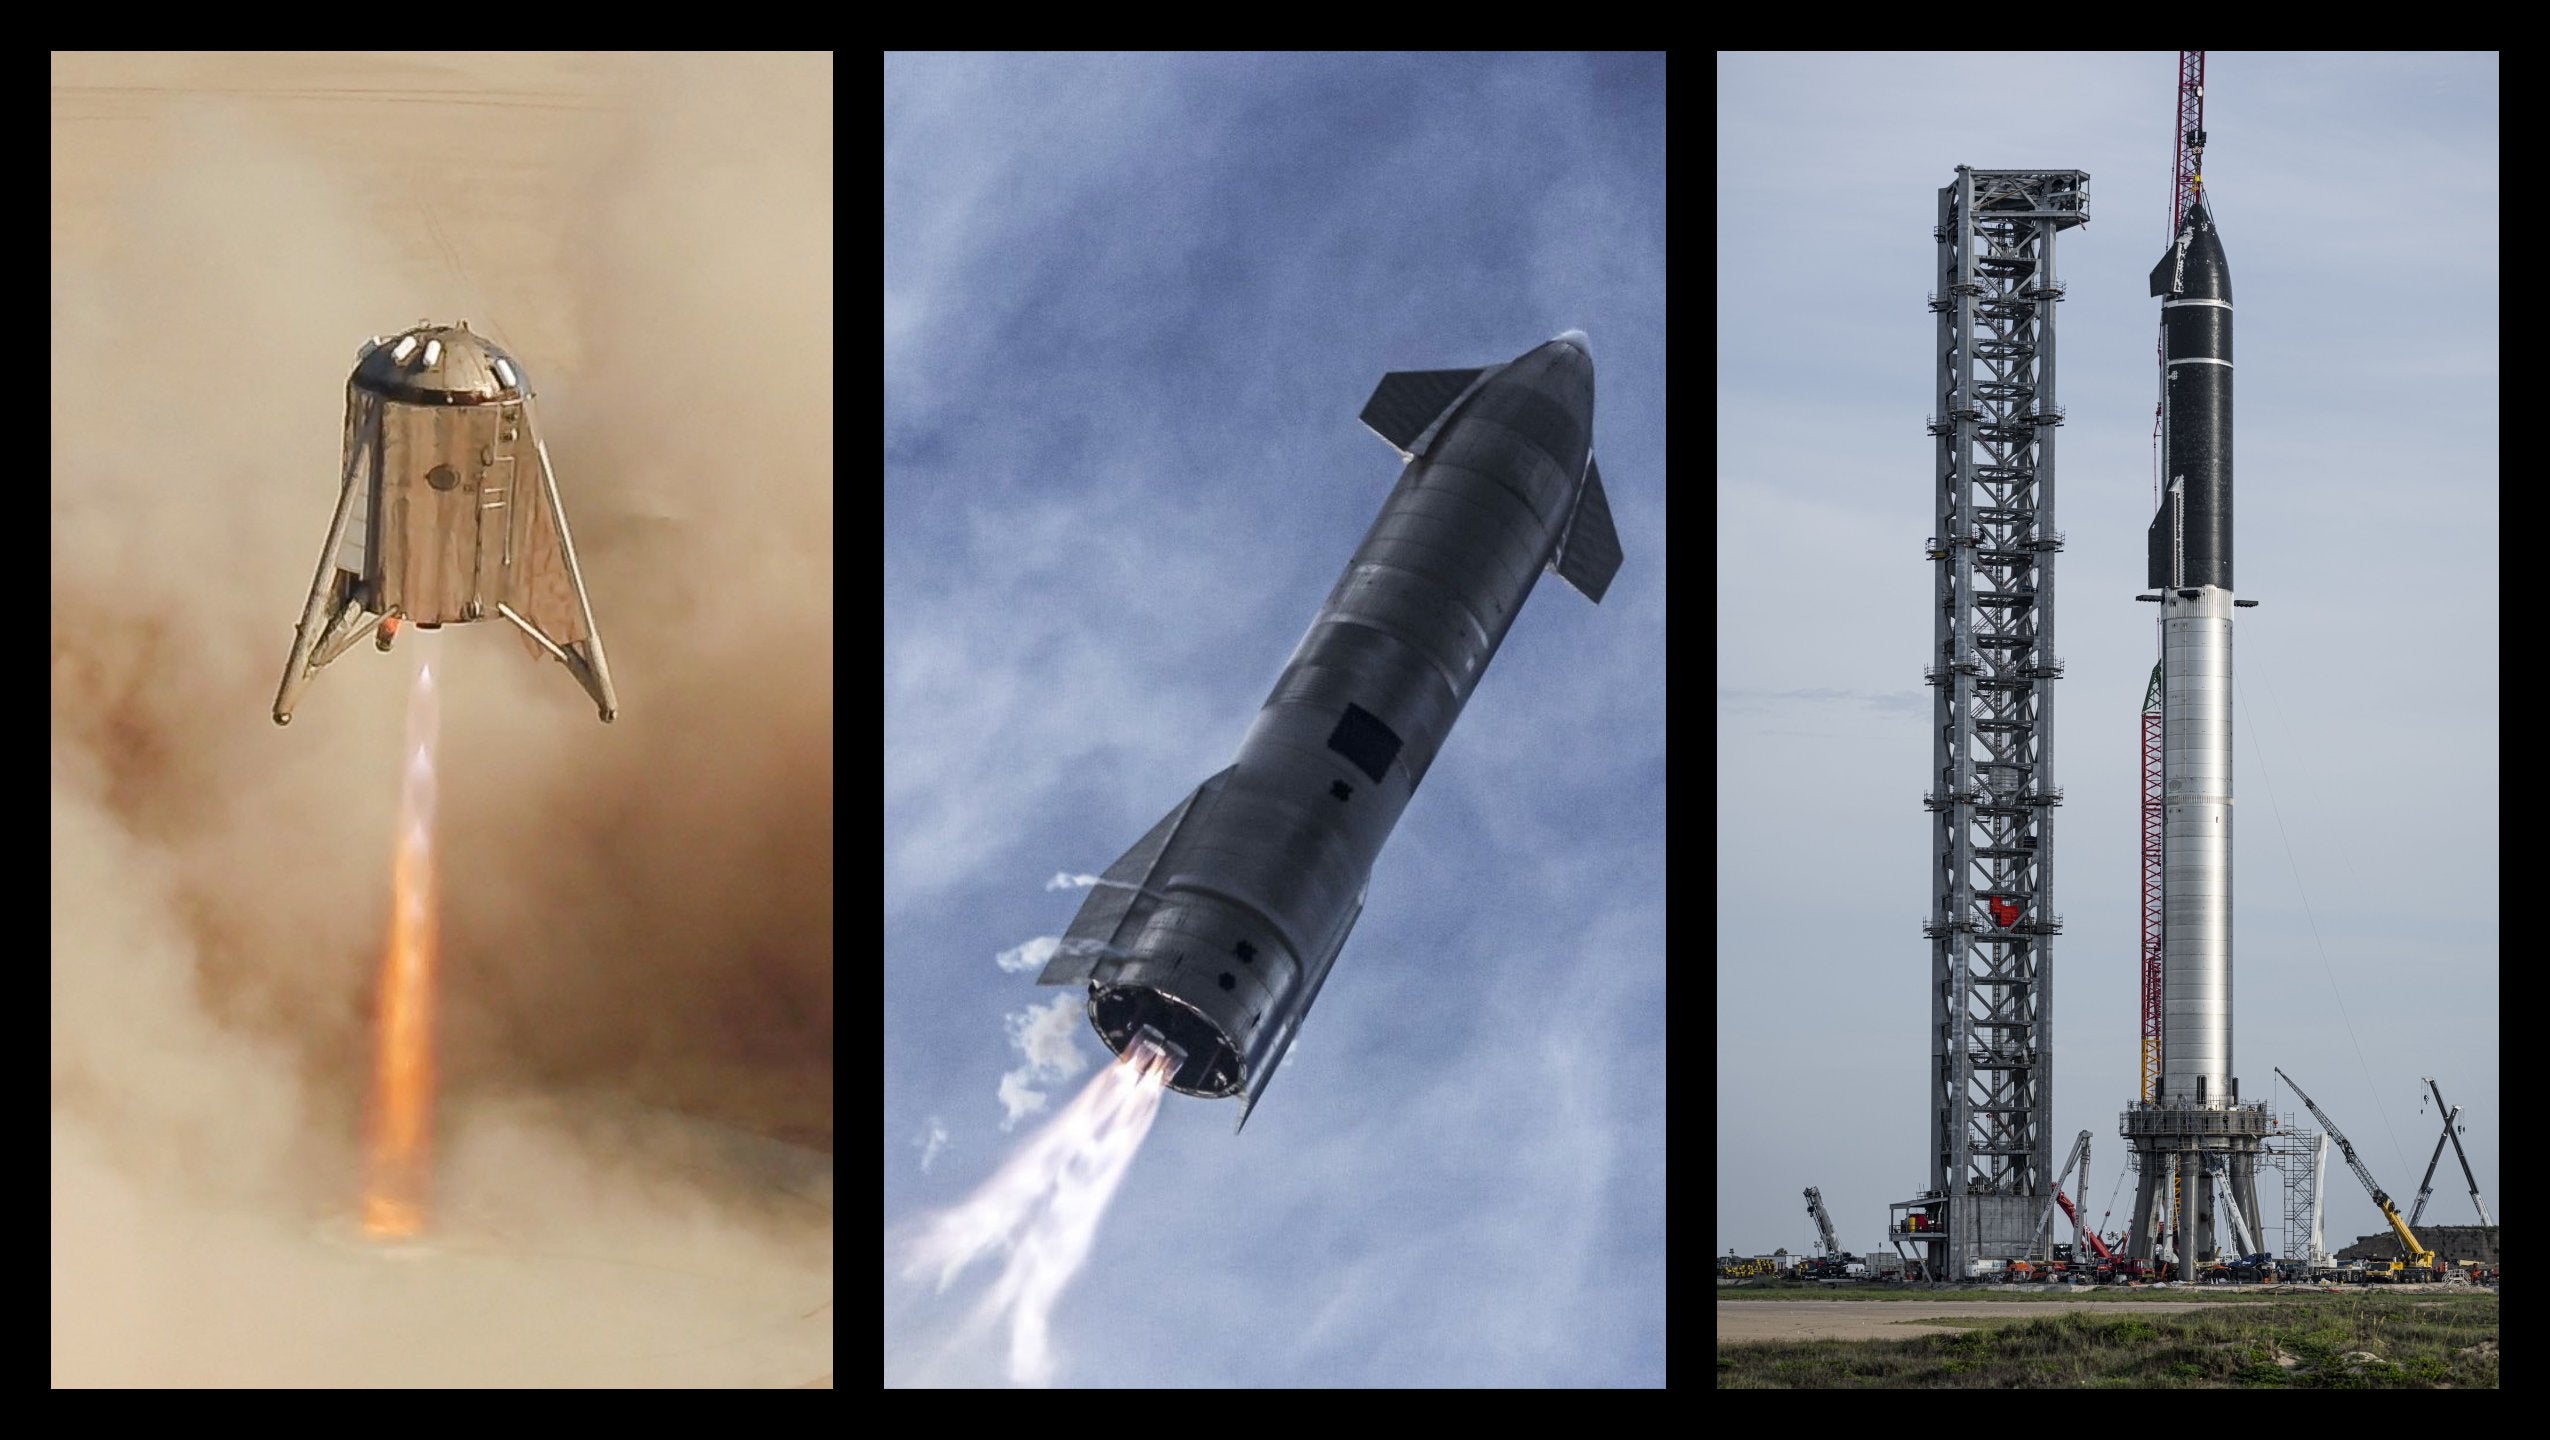 SpaceX Launched Starhopper Two Years Ago, Let’s Look Back At Starship’s Amazing Development!